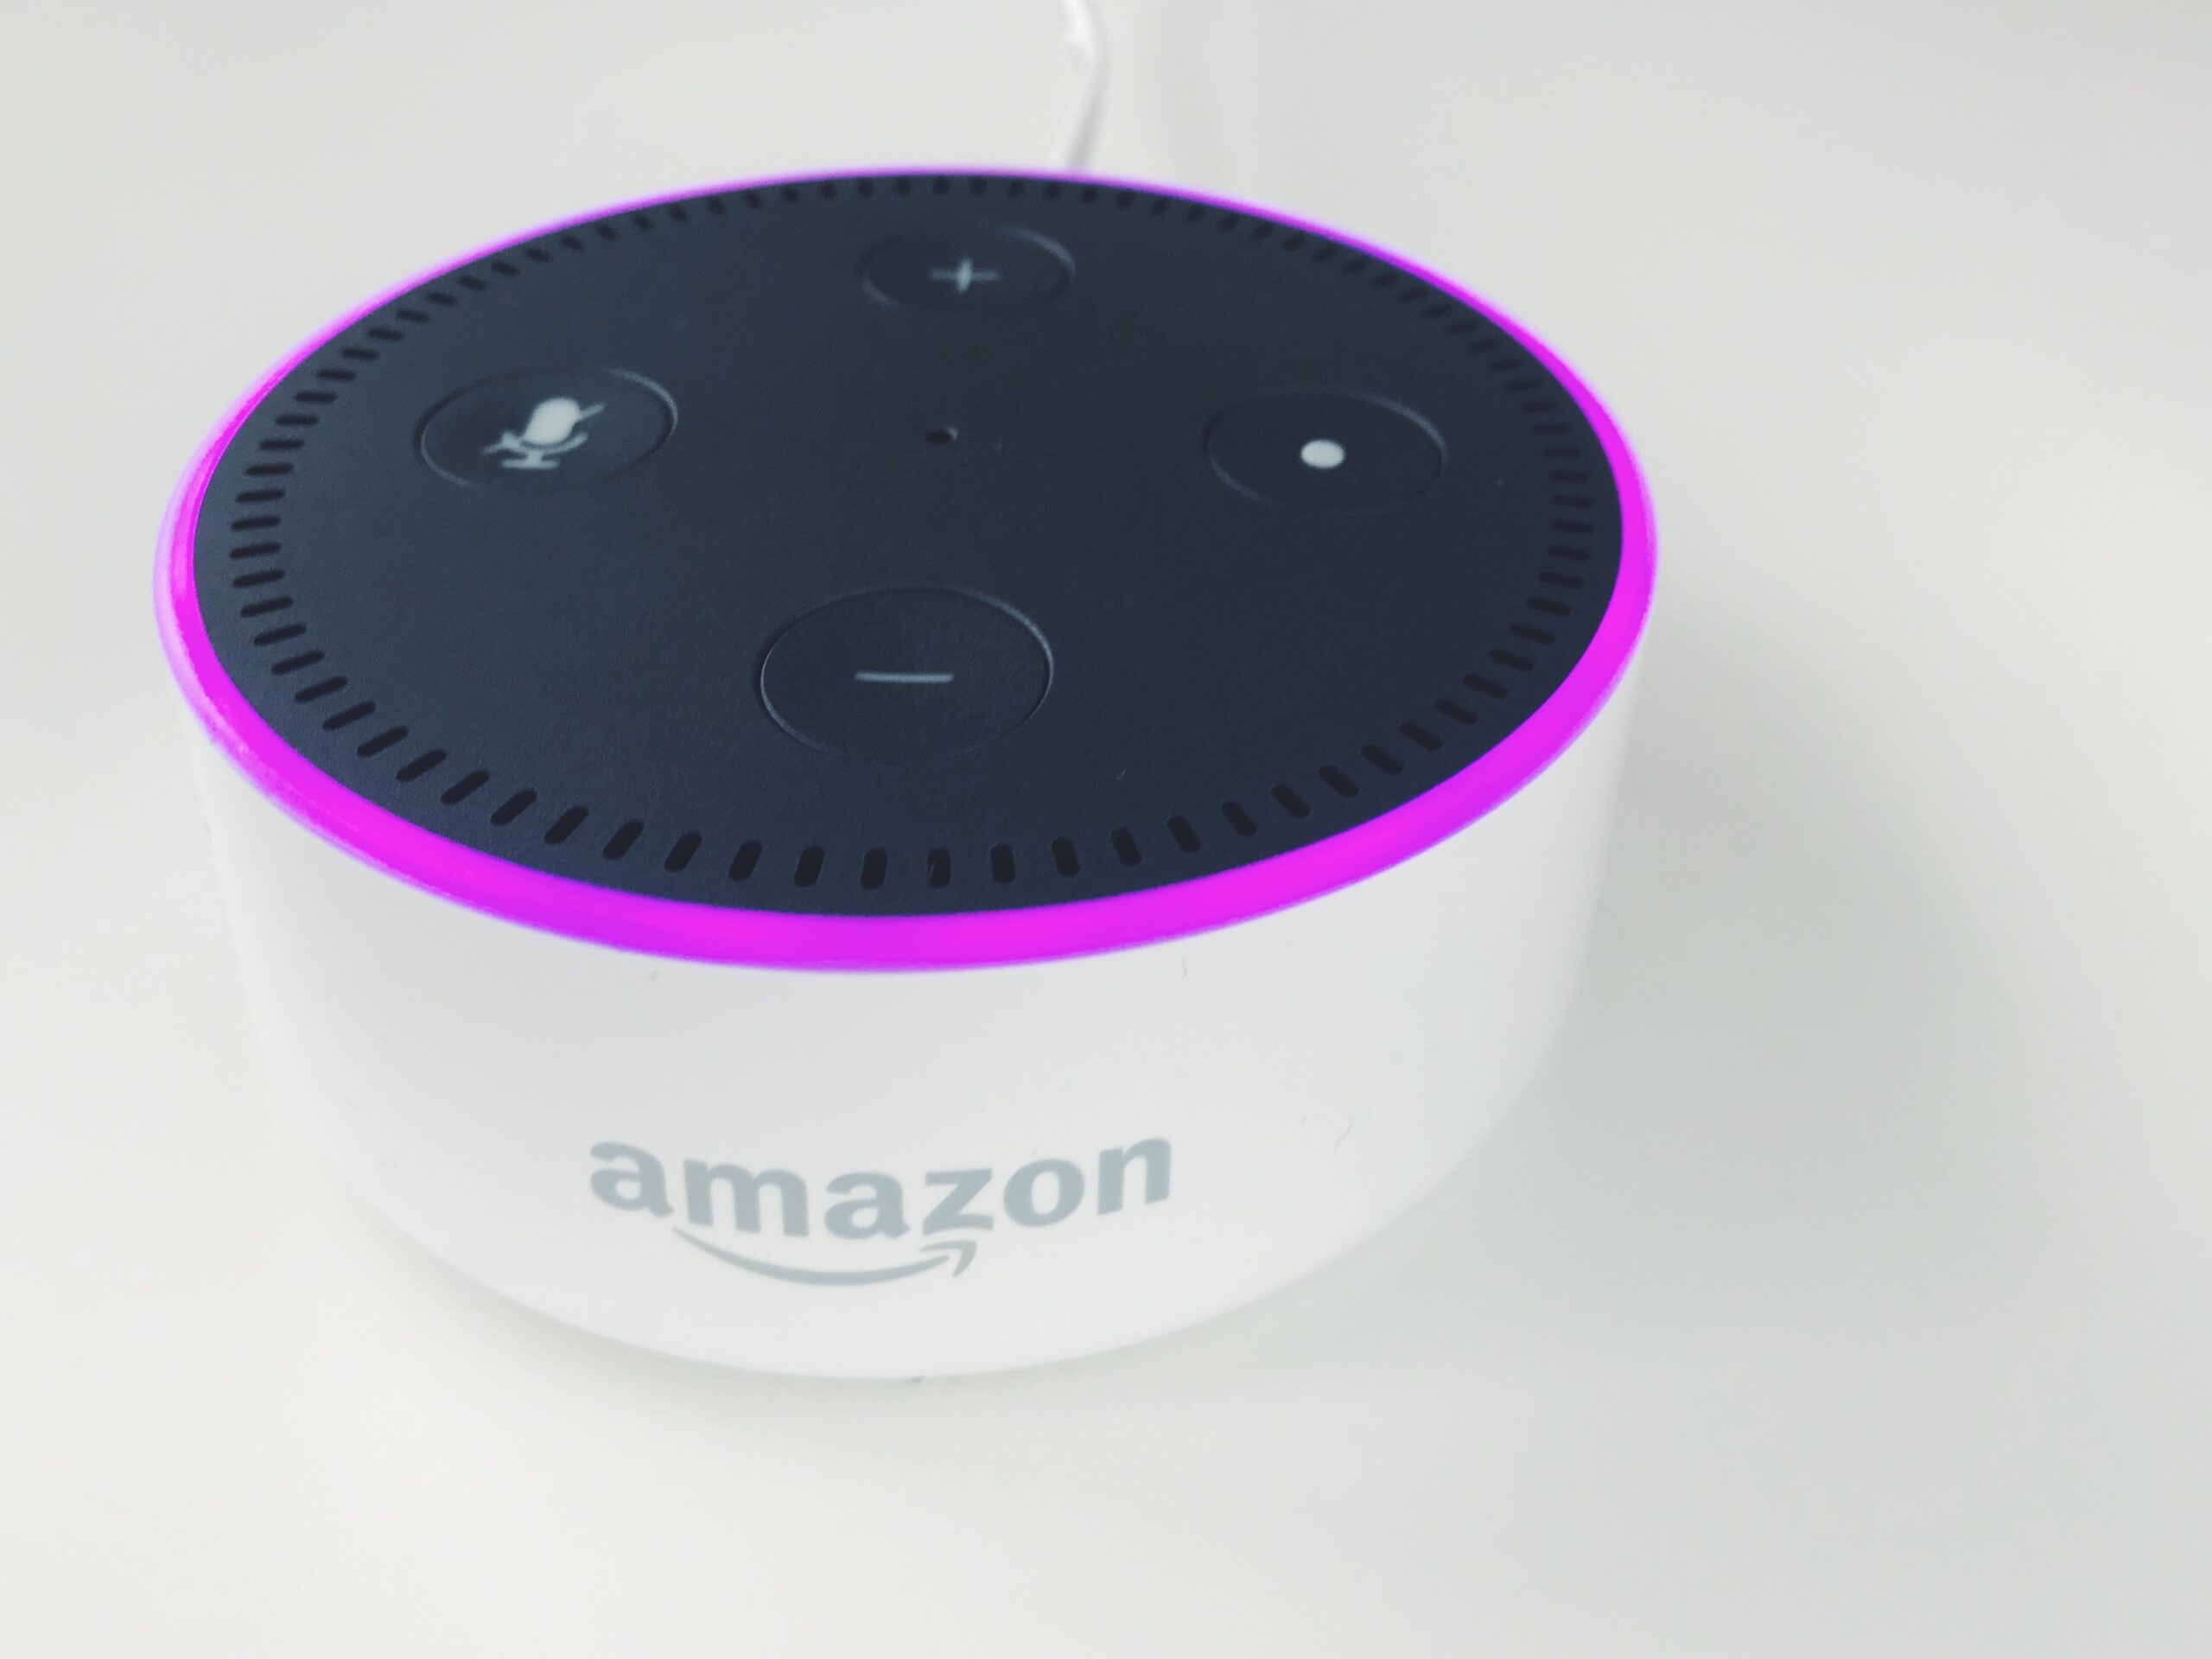 Why the Popularity of Amazon Alexa at CES 2020 Matters to Advertisers